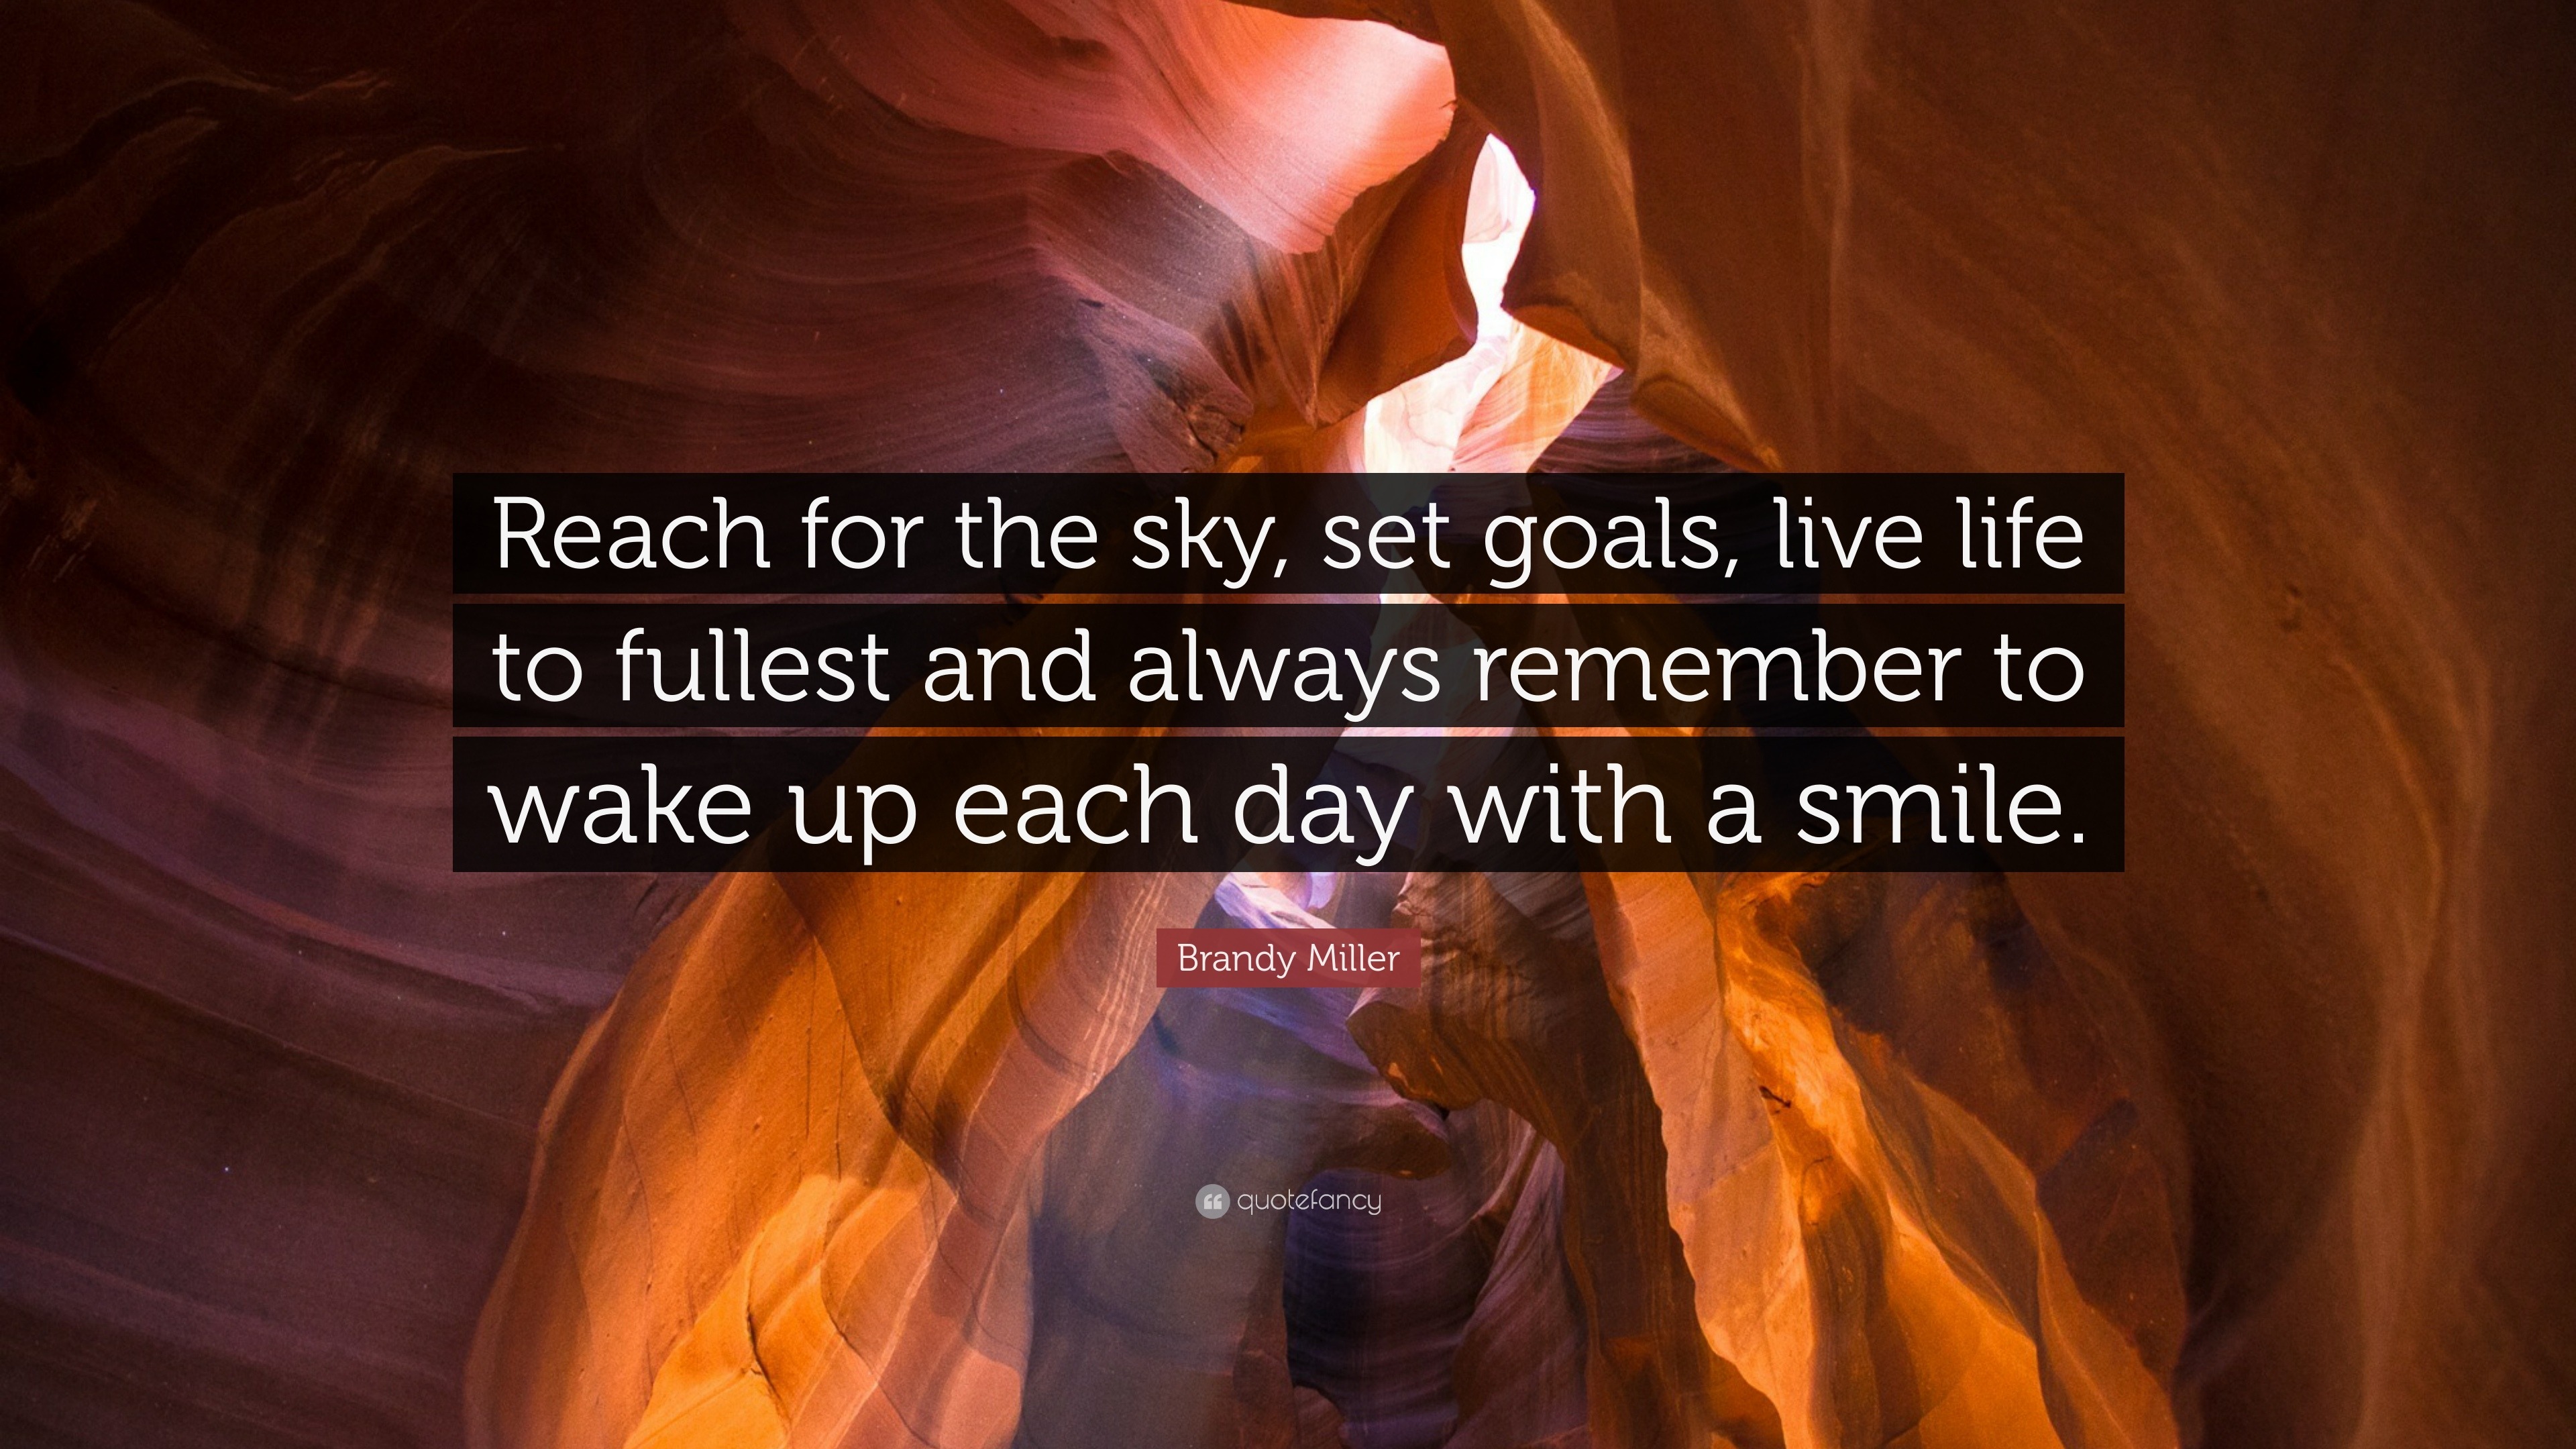 Brandy Miller Quote “Reach for the sky, set goals, live life to fullest and always remember